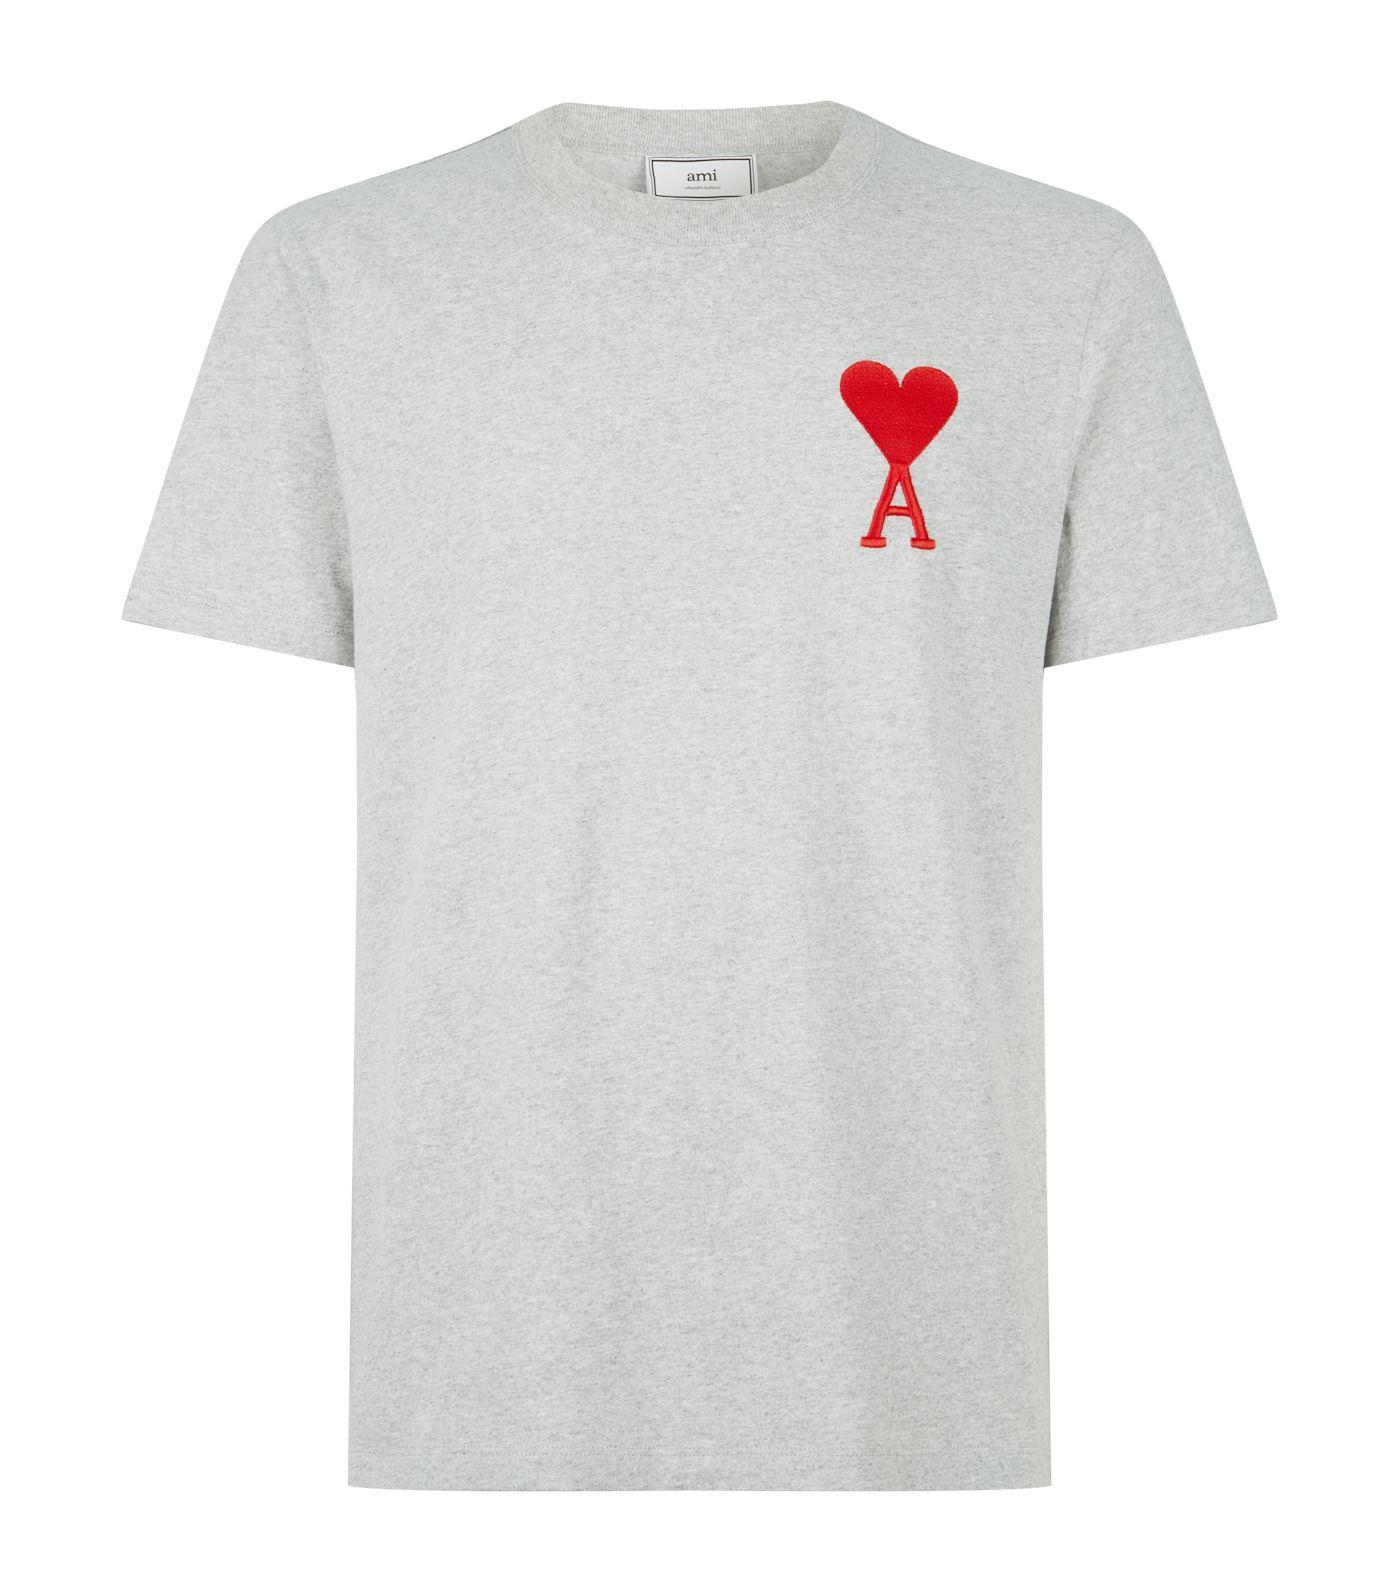 Ami Paris Big Heart T-shirt in Gray for | Lyst